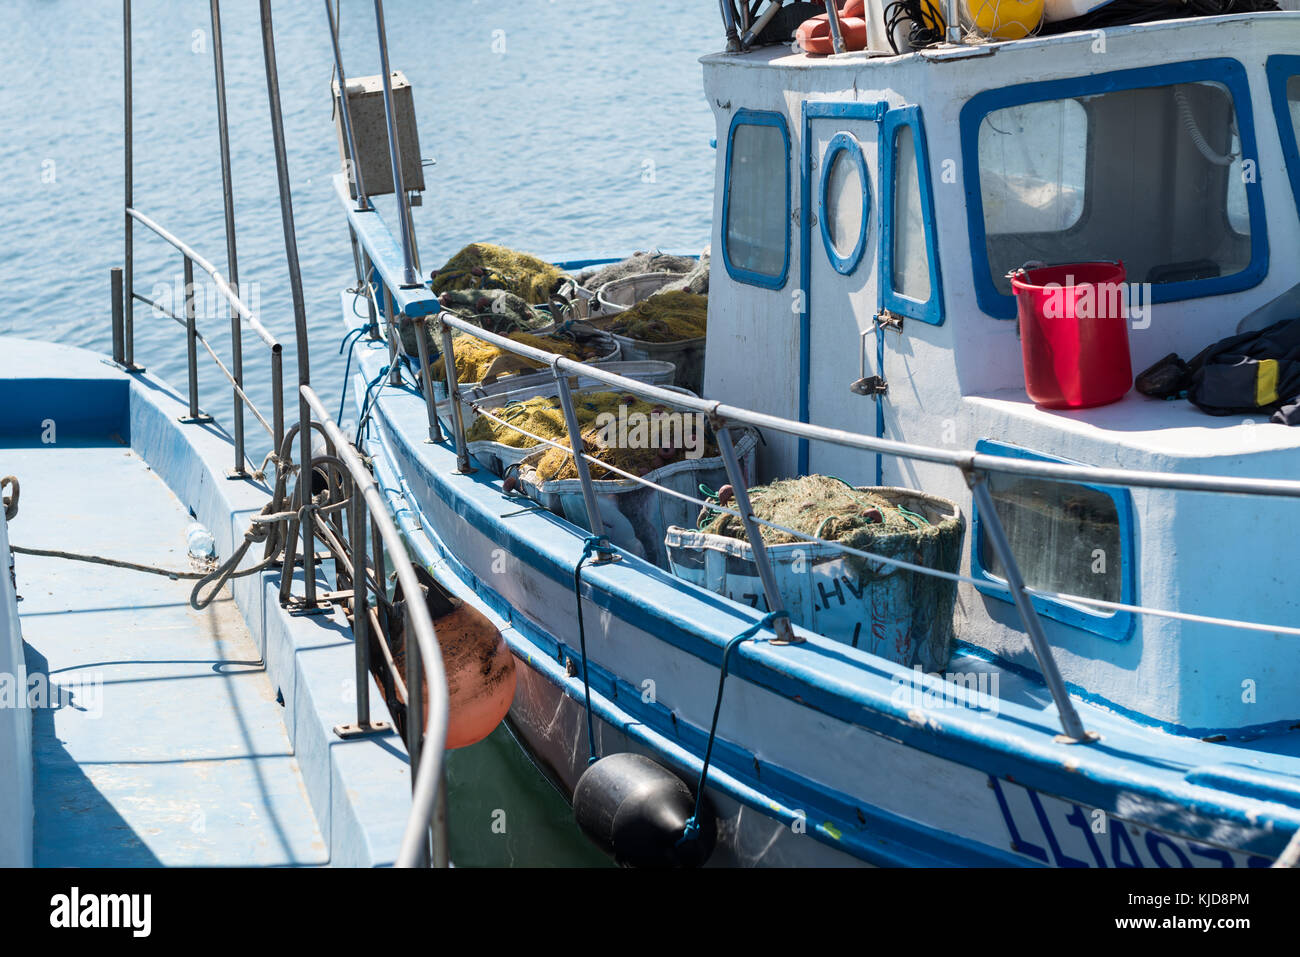 Fishing boat detail with chair, wheel and nets in bags - in Fishing pier,  Larnaca, Cyprus Stock Photo - Alamy